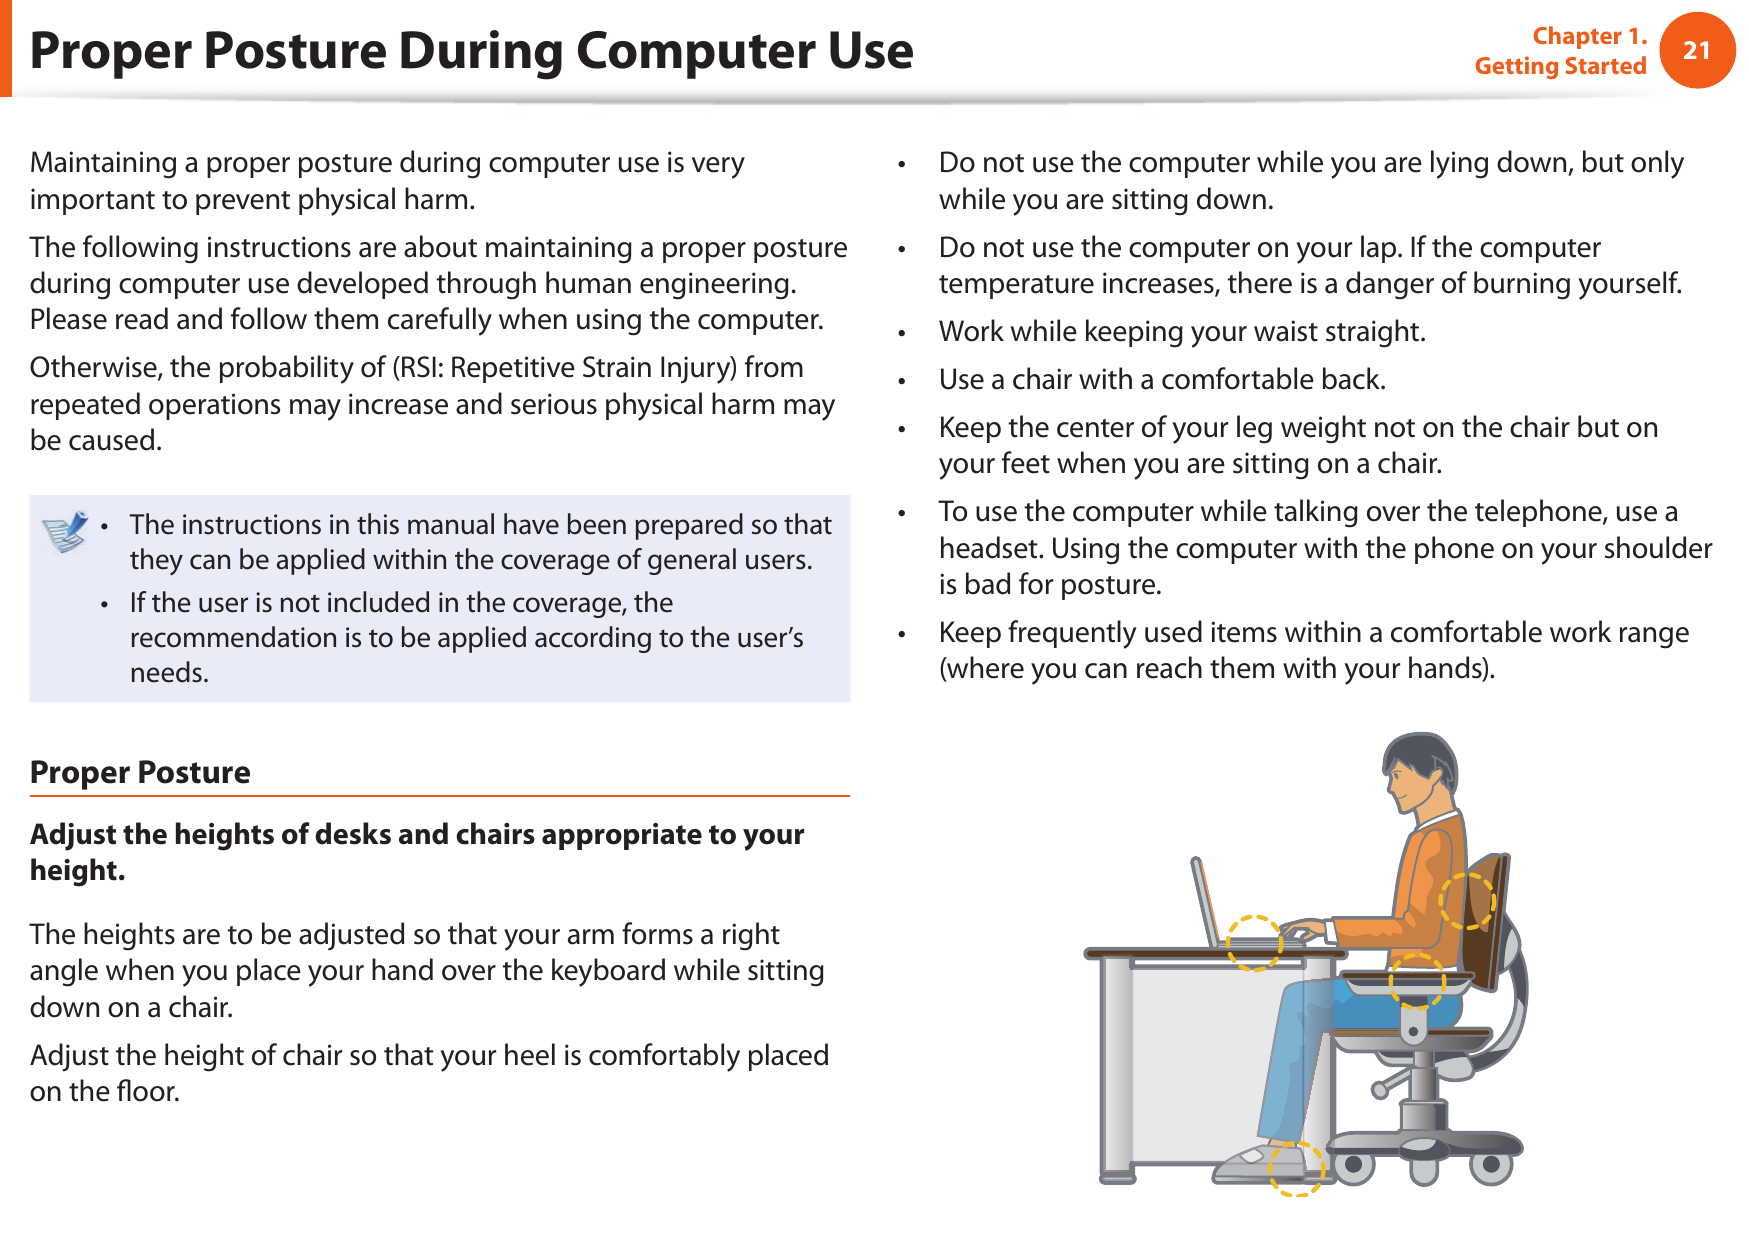 2021Chapter 1. Getting StartedProper Posture During Computer UseMaintaining a proper posture during computer use is very important to prevent physical harm.The following instructions are about maintaining a proper posture during computer use developed through human engineering. Please read and follow them carefully when using the computer.Otherwise, the probability of (RSI: Repetitive Strain Injury) from repeated operations may increase and serious physical harm may be caused.The instructions in this manual have been prepared so that • they can be applied within the coverage of general users. If the user is not included in the coverage, the • recommendation is to be applied according to the user’s needs.Proper PostureAdjust the heights of desks and chairs appropriate to your height.The heights are to be adjusted so that your arm forms a right angle when you place your hand over the keyboard while sitting down on a chair.Adjust the height of chair so that your heel is comfortably placed on the  oor.Do not use the computer while you are lying down, but only • while you are sitting down.Do not use the computer on your lap. If the computer • temperature increases, there is a danger of burning yourself.Work while keeping your waist straight.• Use a chair with a comfortable back.• Keep the center of your leg weight not on the chair but on • your feet when you are sitting on a chair.To use the computer while talking over the telephone, use a • headset. Using the computer with the phone on your shoulder is bad for posture.Keep frequently used items within a comfortable work range • (where you can reach them with your hands).